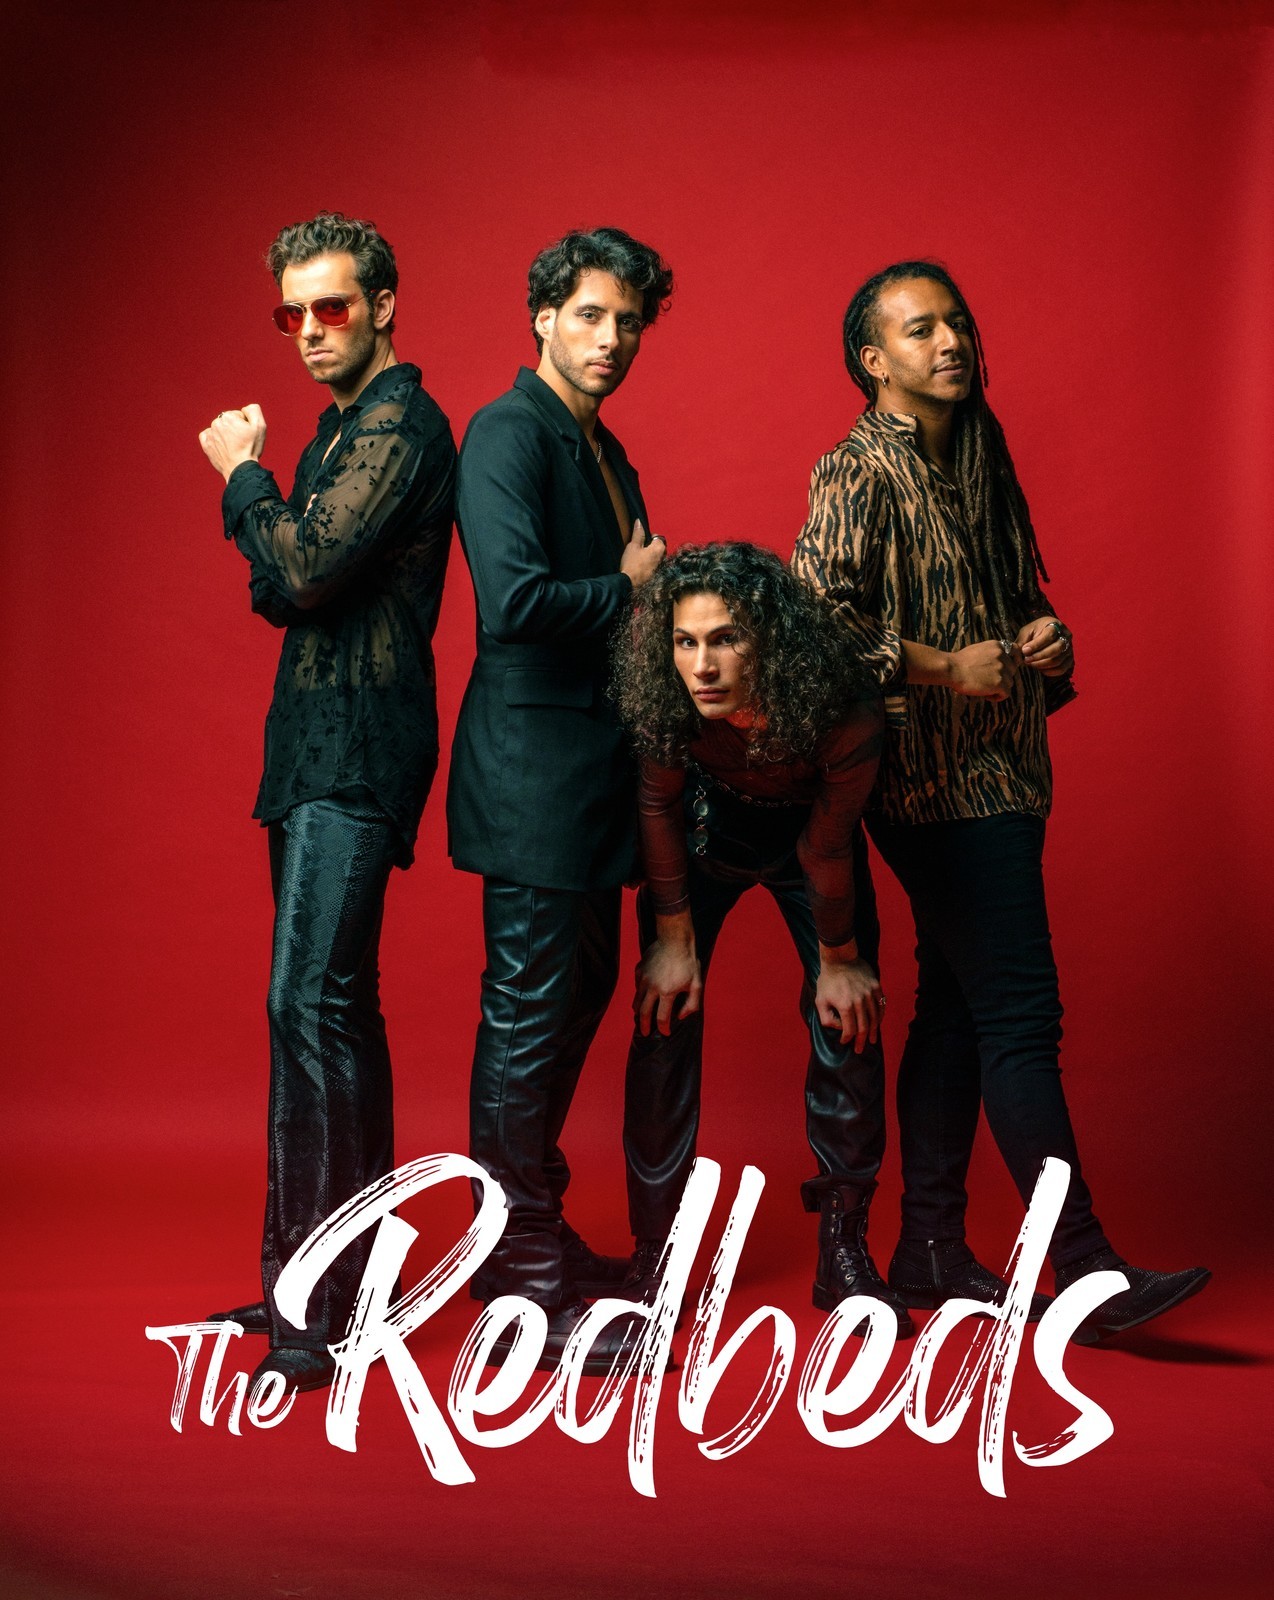 The Redbeds